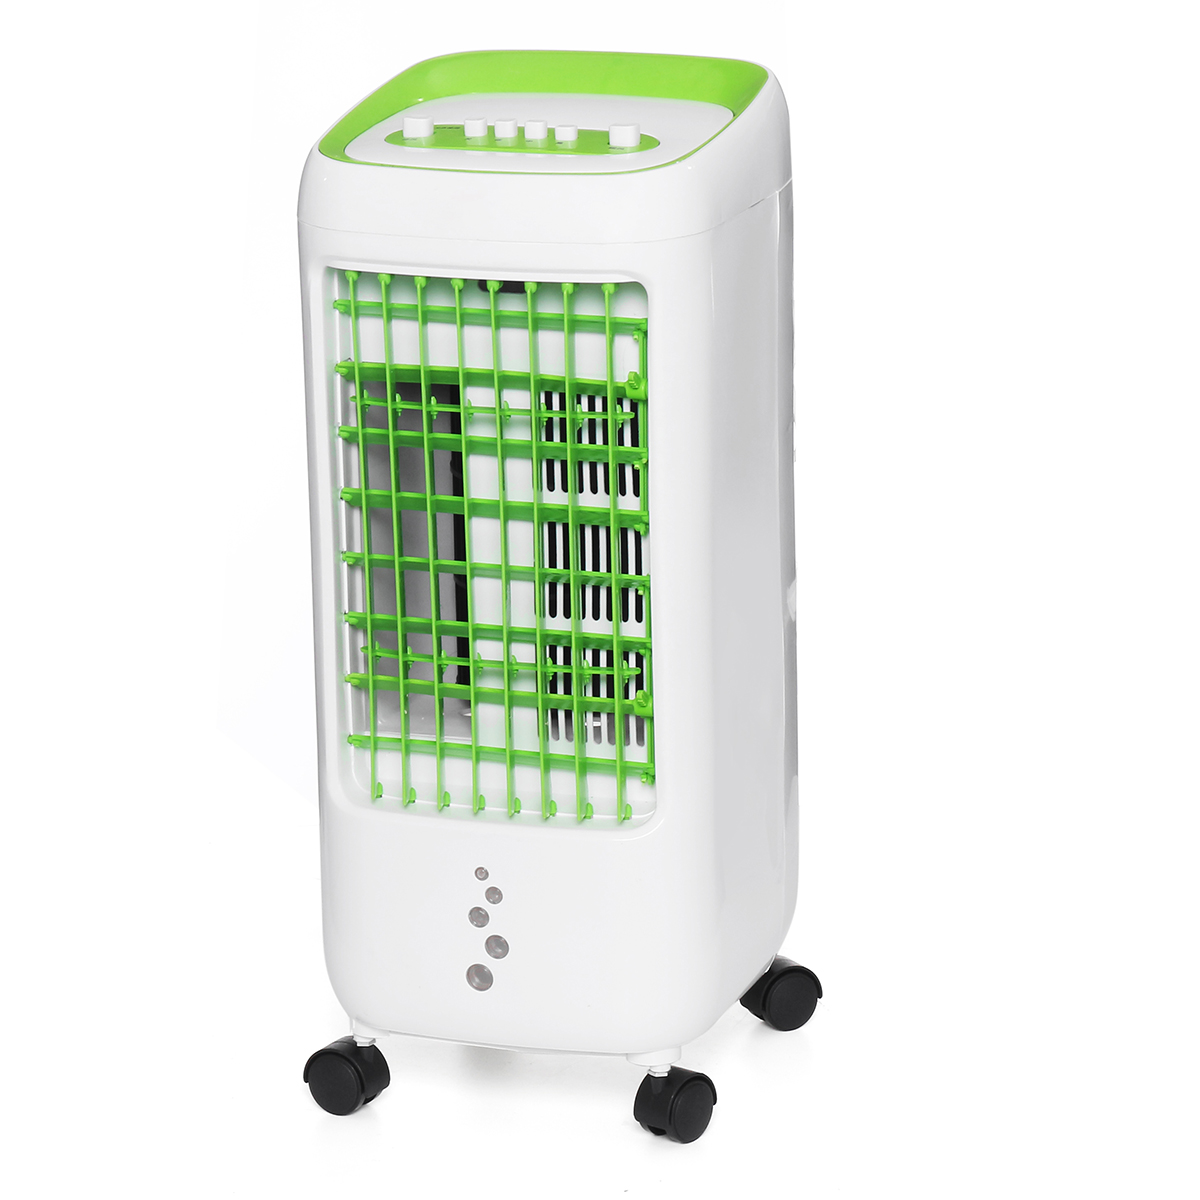 Air-Conditioner-Fan-Quiet-Chiller-Strong-Refrigeration-Air-Conditioning-Fan-For-Student-Dormitory-Ho-1457833